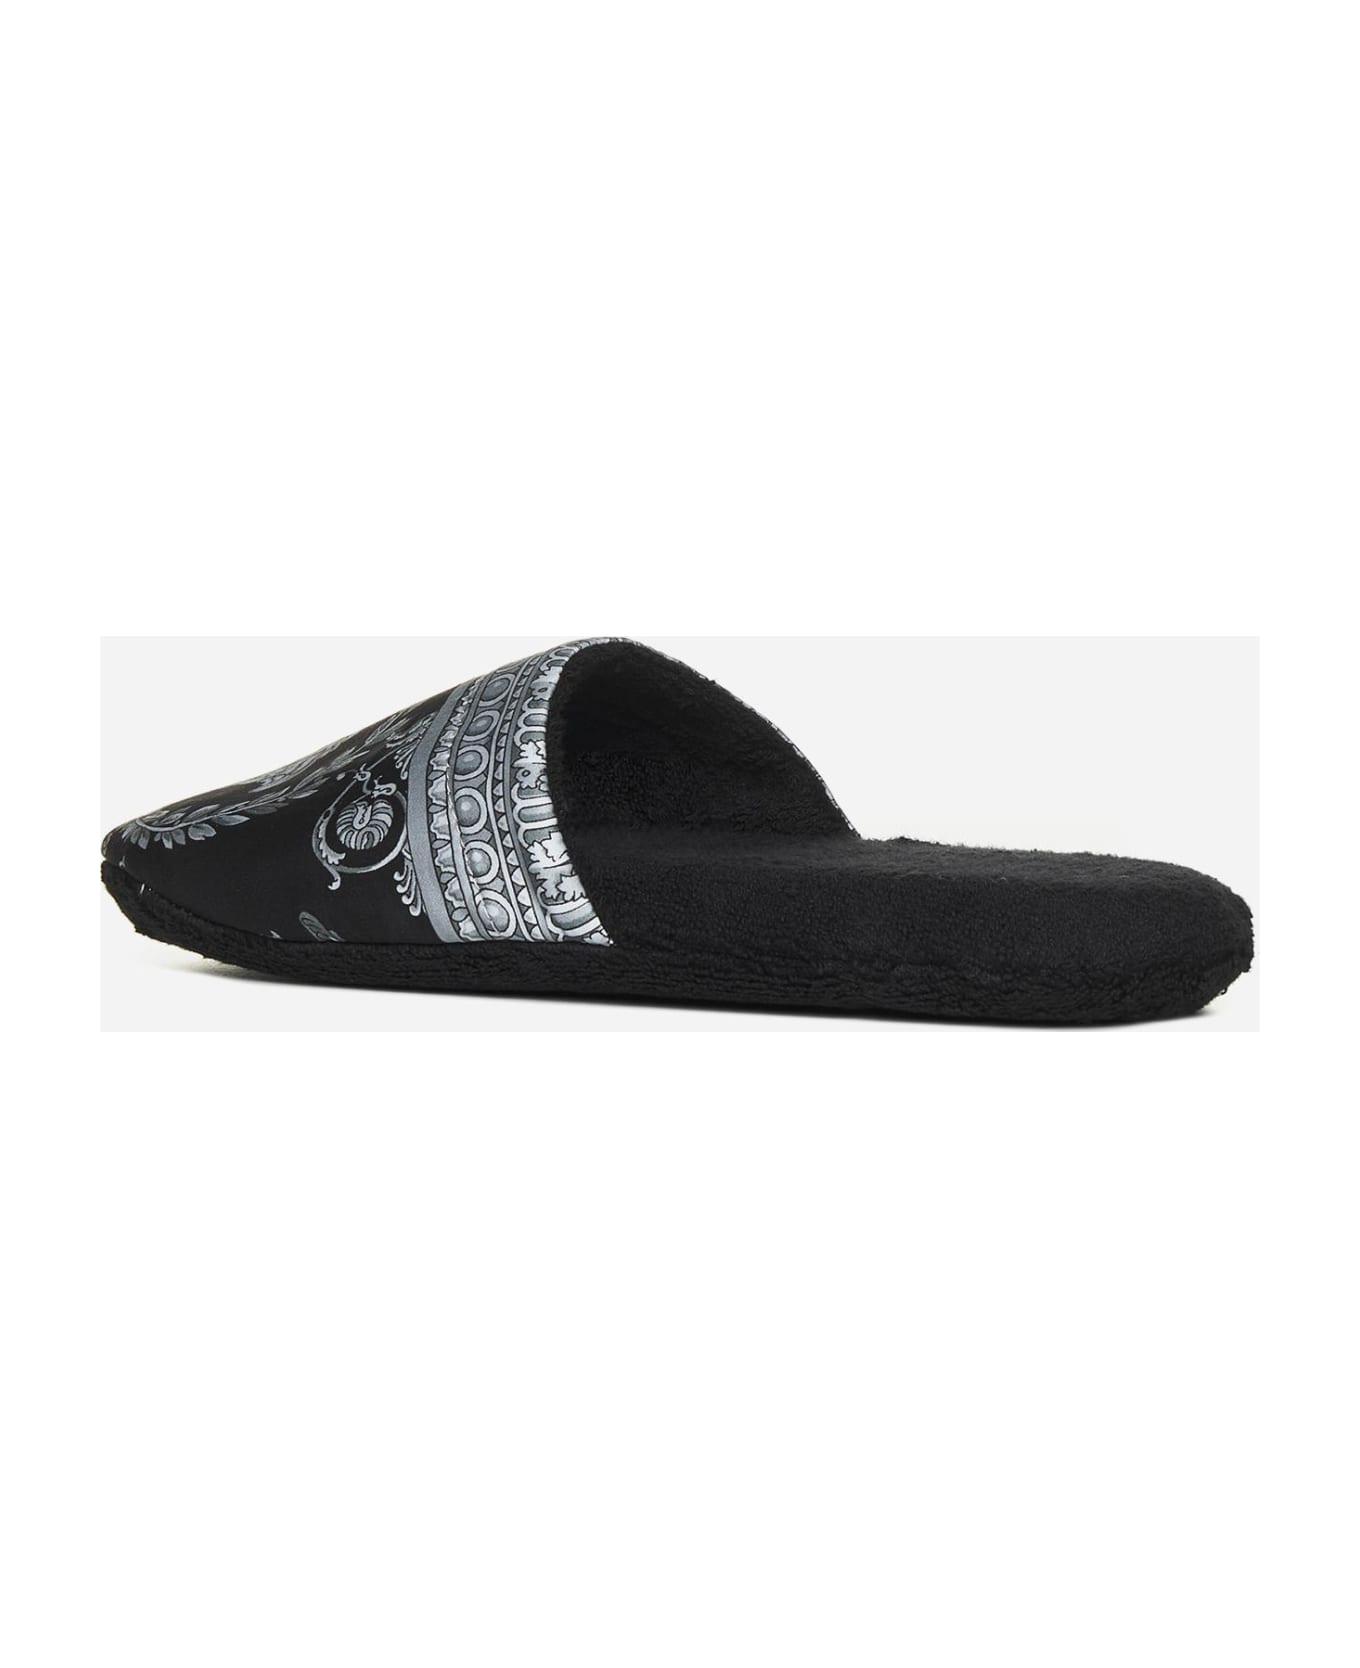 Versace Barocco Print Cotton Slippers その他各種シューズ